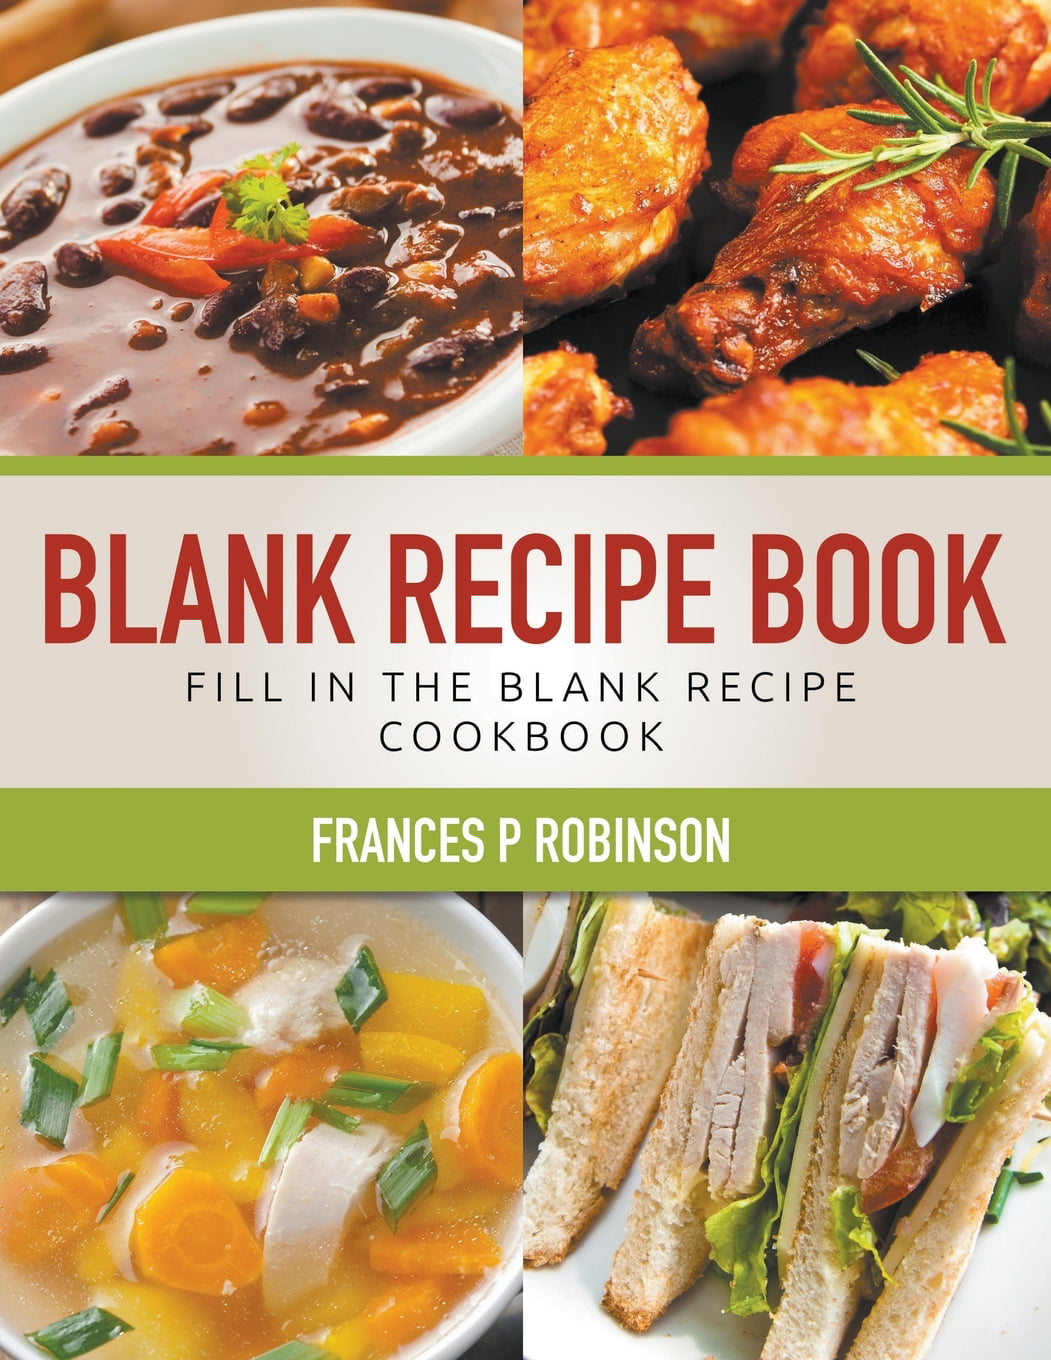 Blank Recipe Book to Write in your Own Recipes l Cute Empty Cook Books to  Write in - 60+ Recipe Book Blank Cookbooks for Family Recipes - 8x6